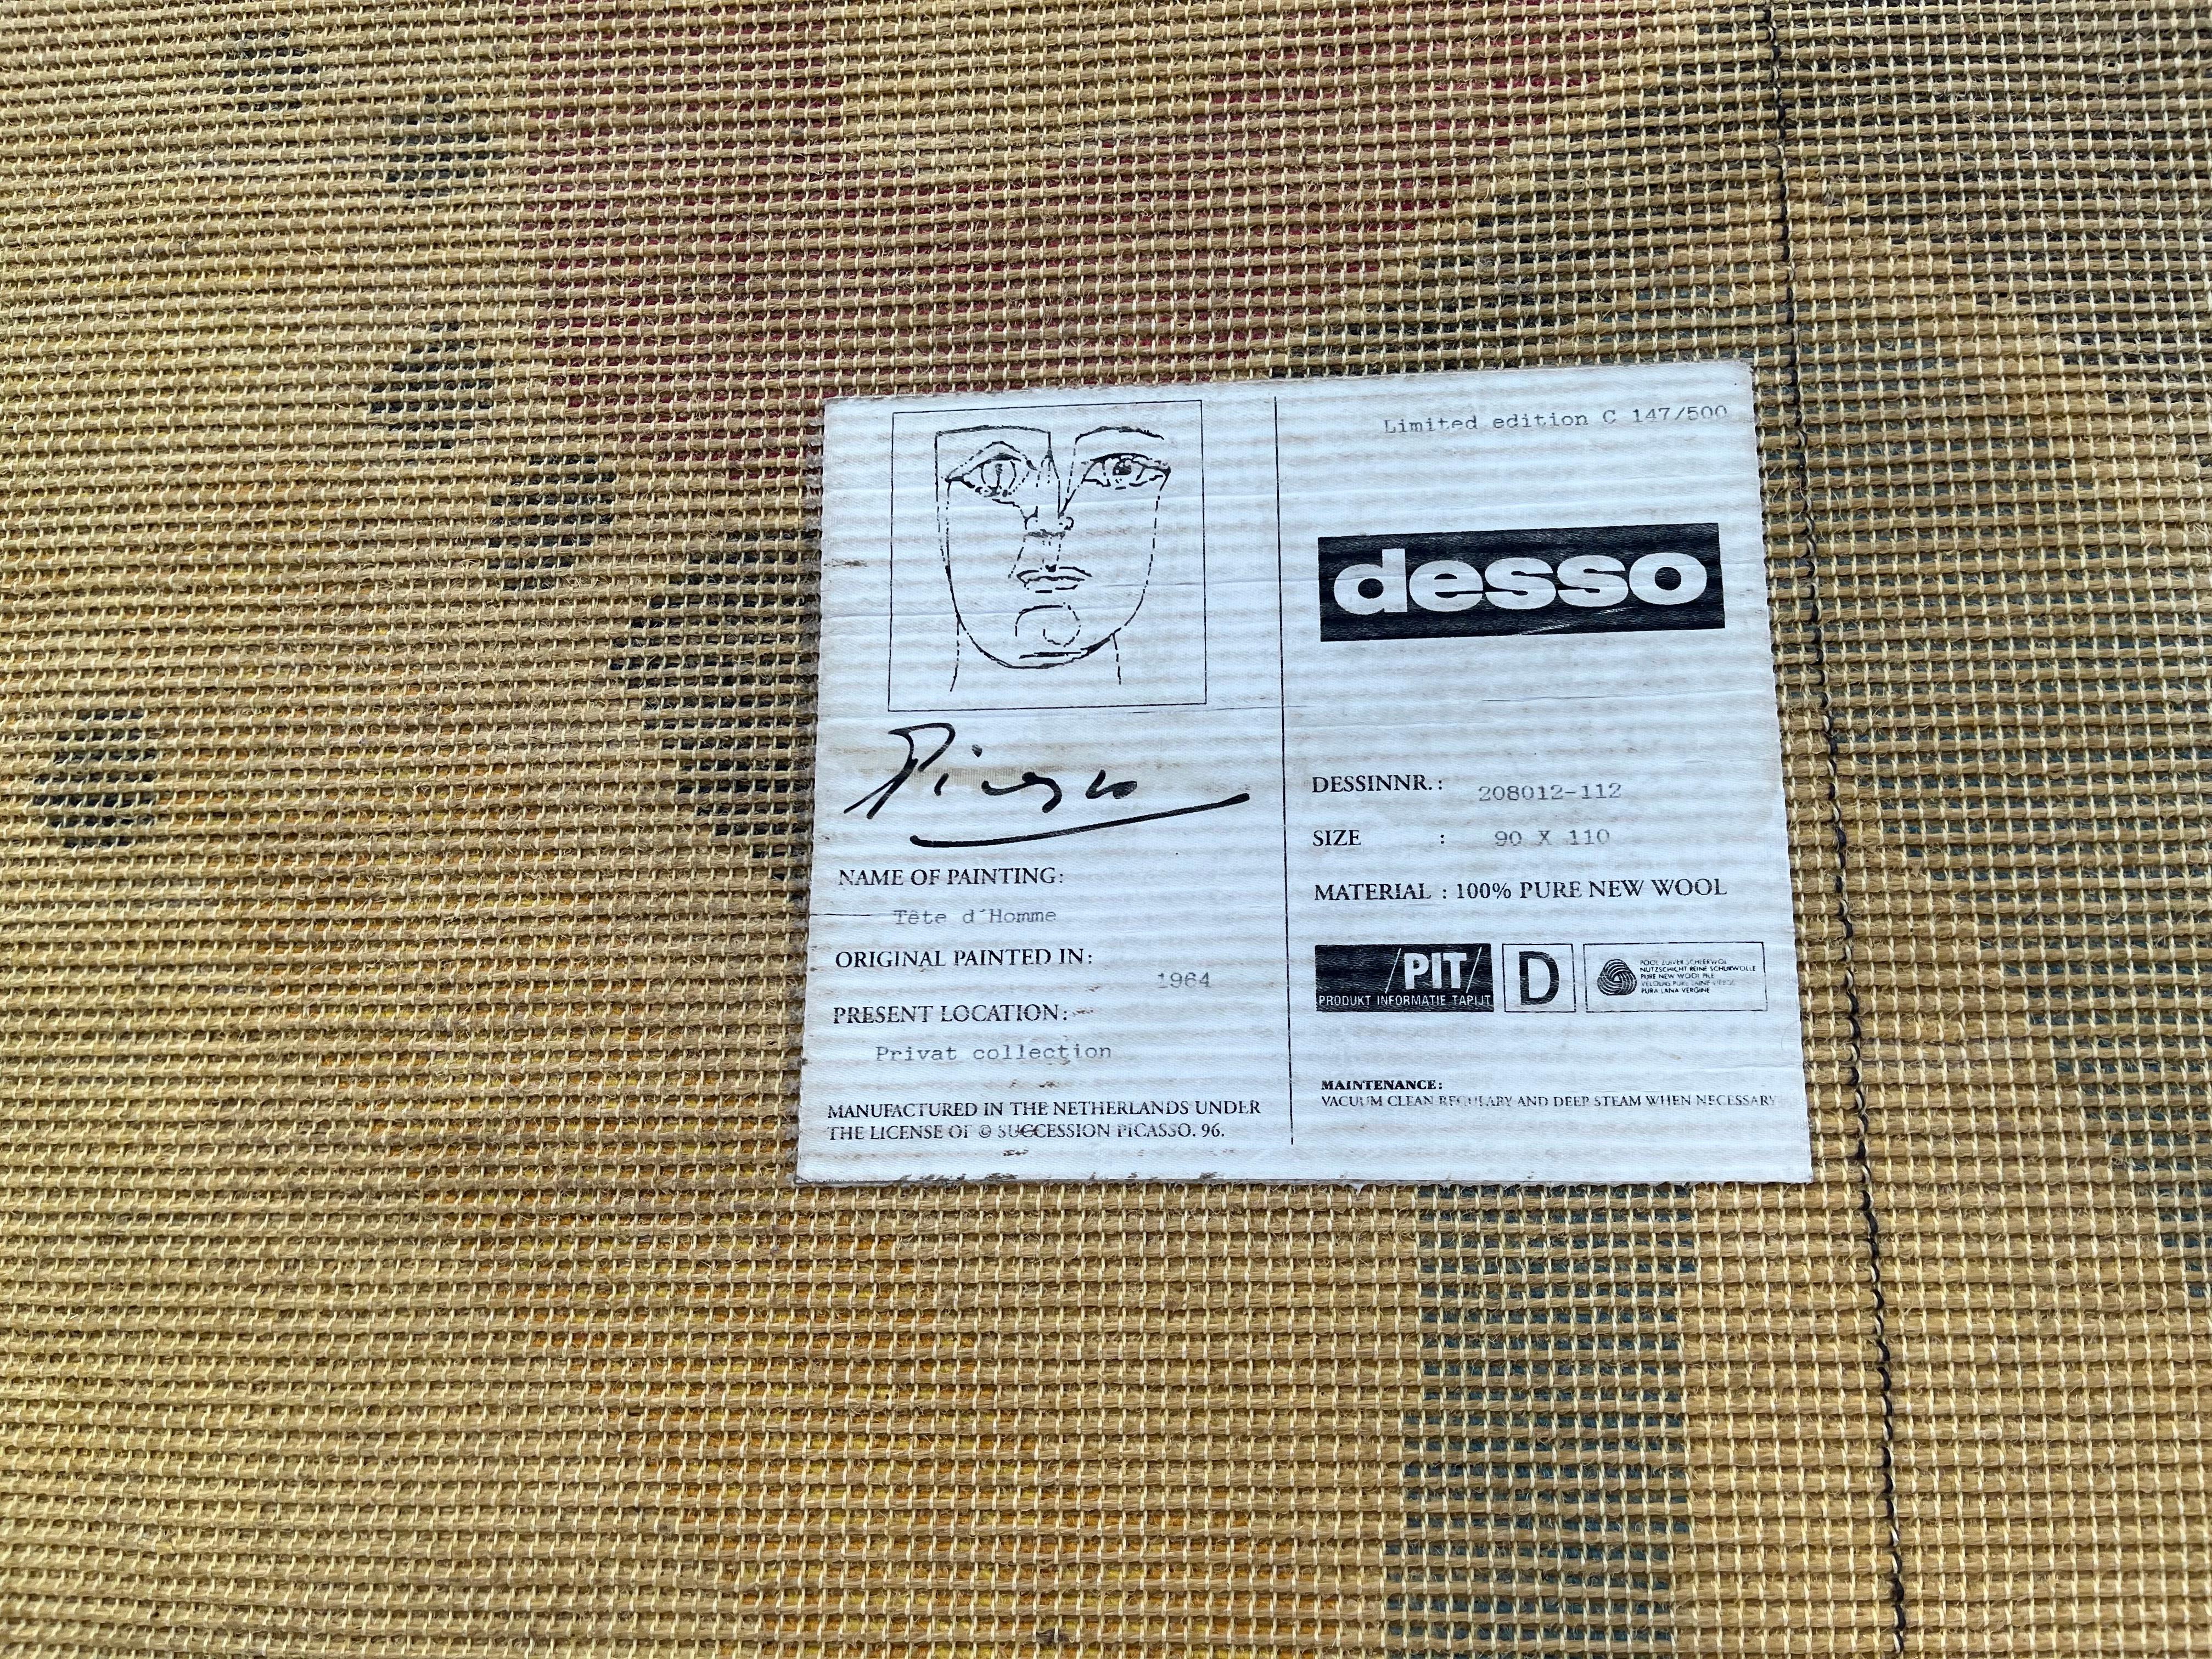 Picasso Wall Rug for Desso Limited Edition 5